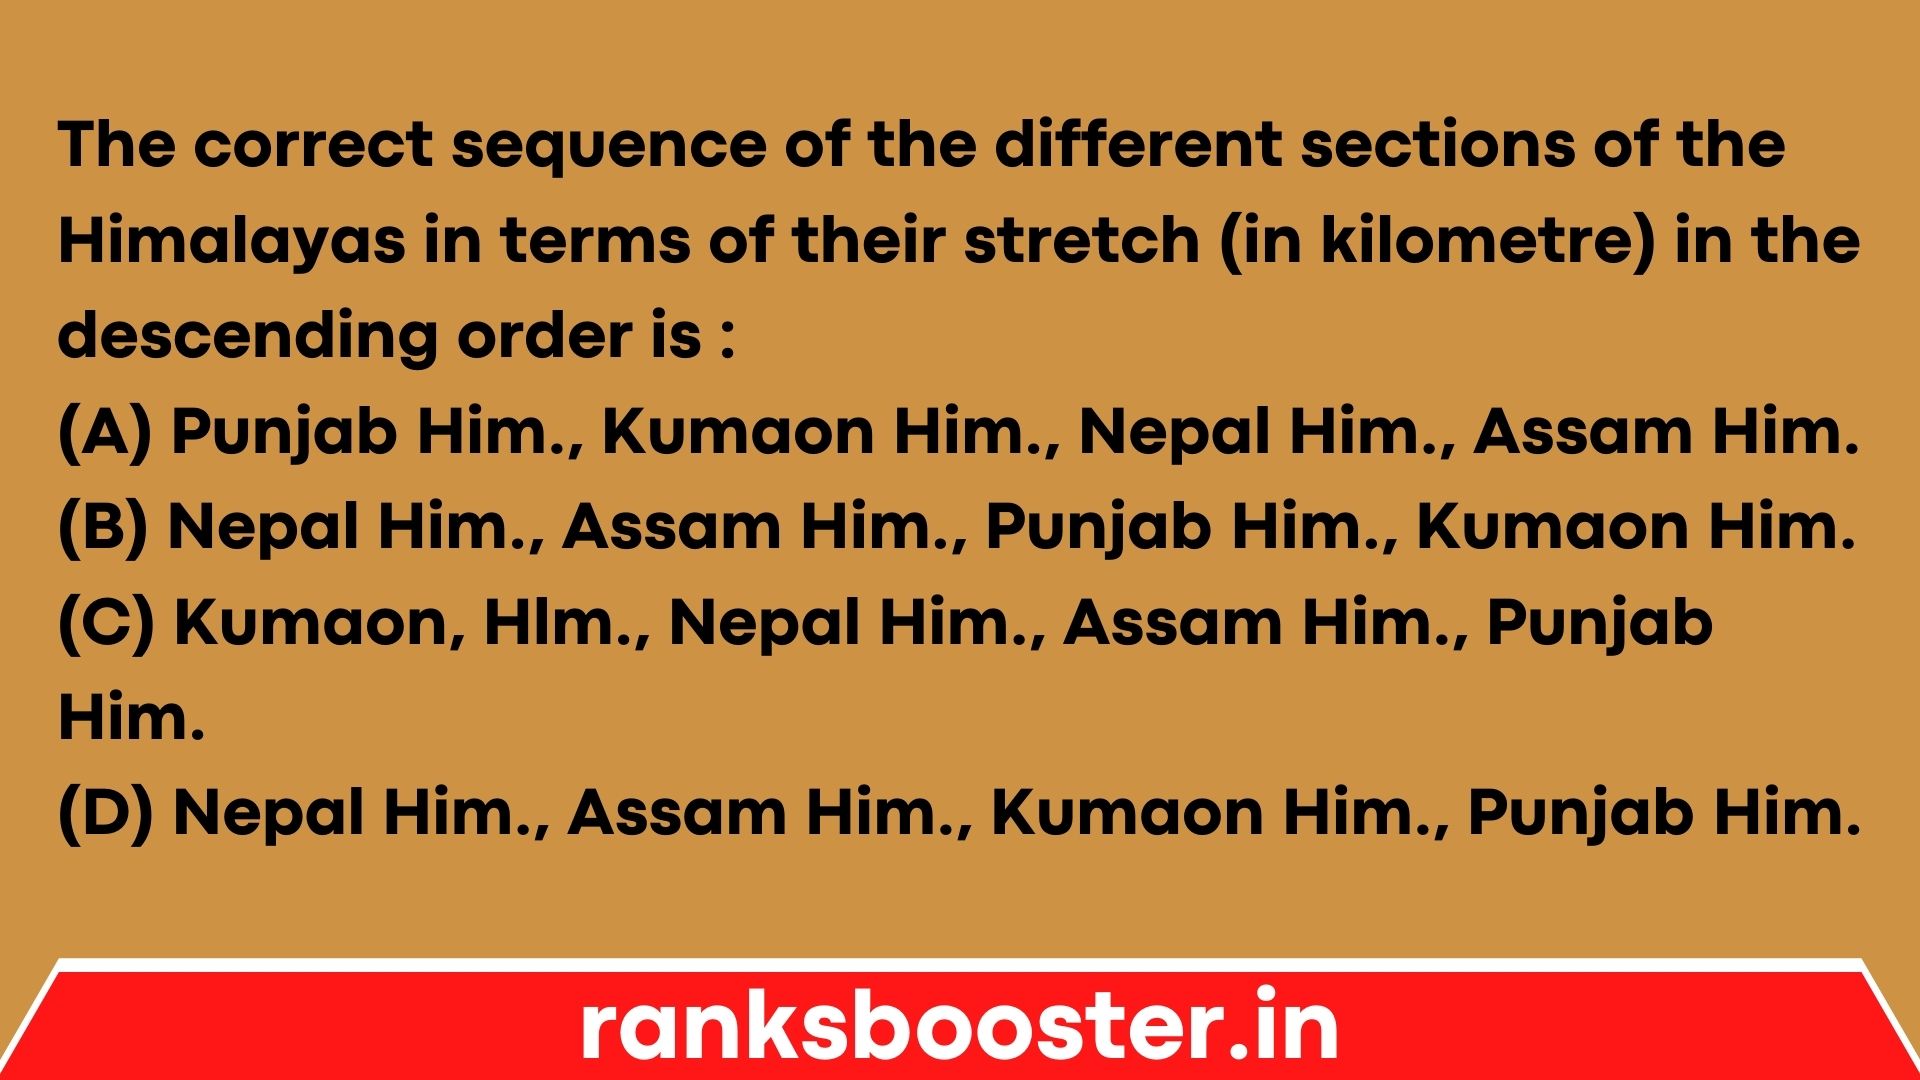 The correct sequence of the different sections of the Himalayas in terms of their stretch (in kilometre) in the descending order is